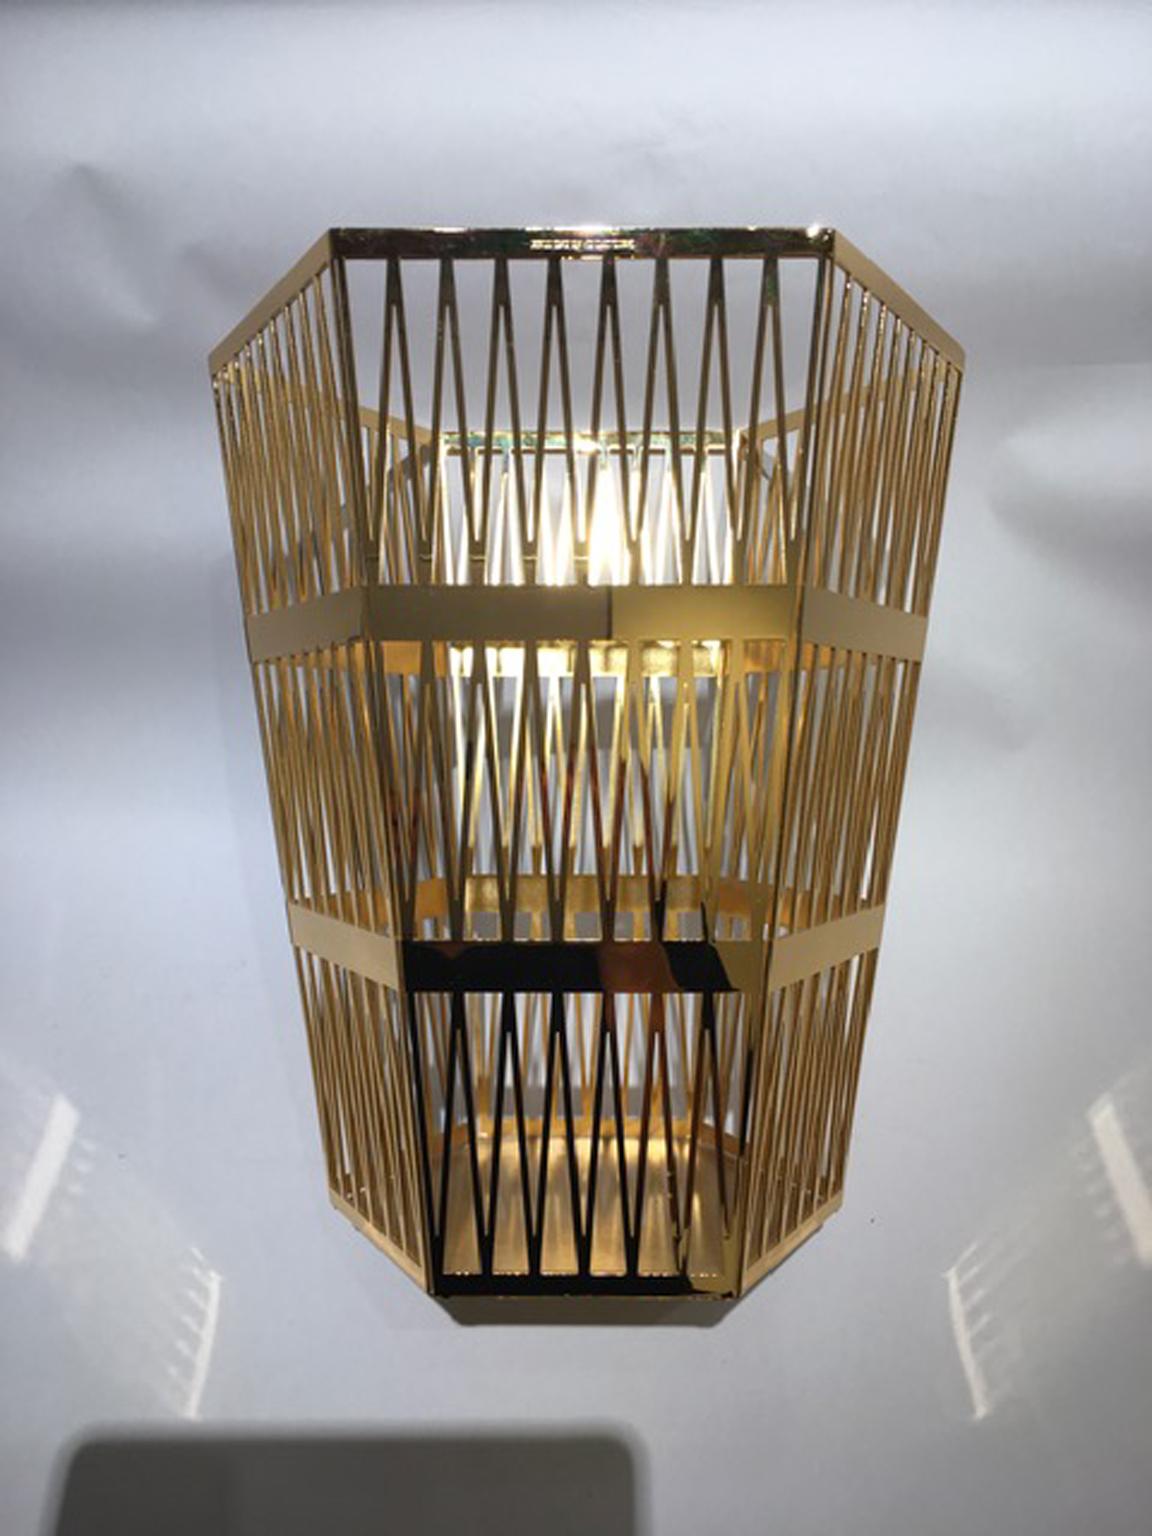 The elegant and modern paper basket in stainless steel, is manufactured in Italy and designed by Richard Hutten. The metal mesh becomes a decorative pattern and the basket could be put on the table or console.